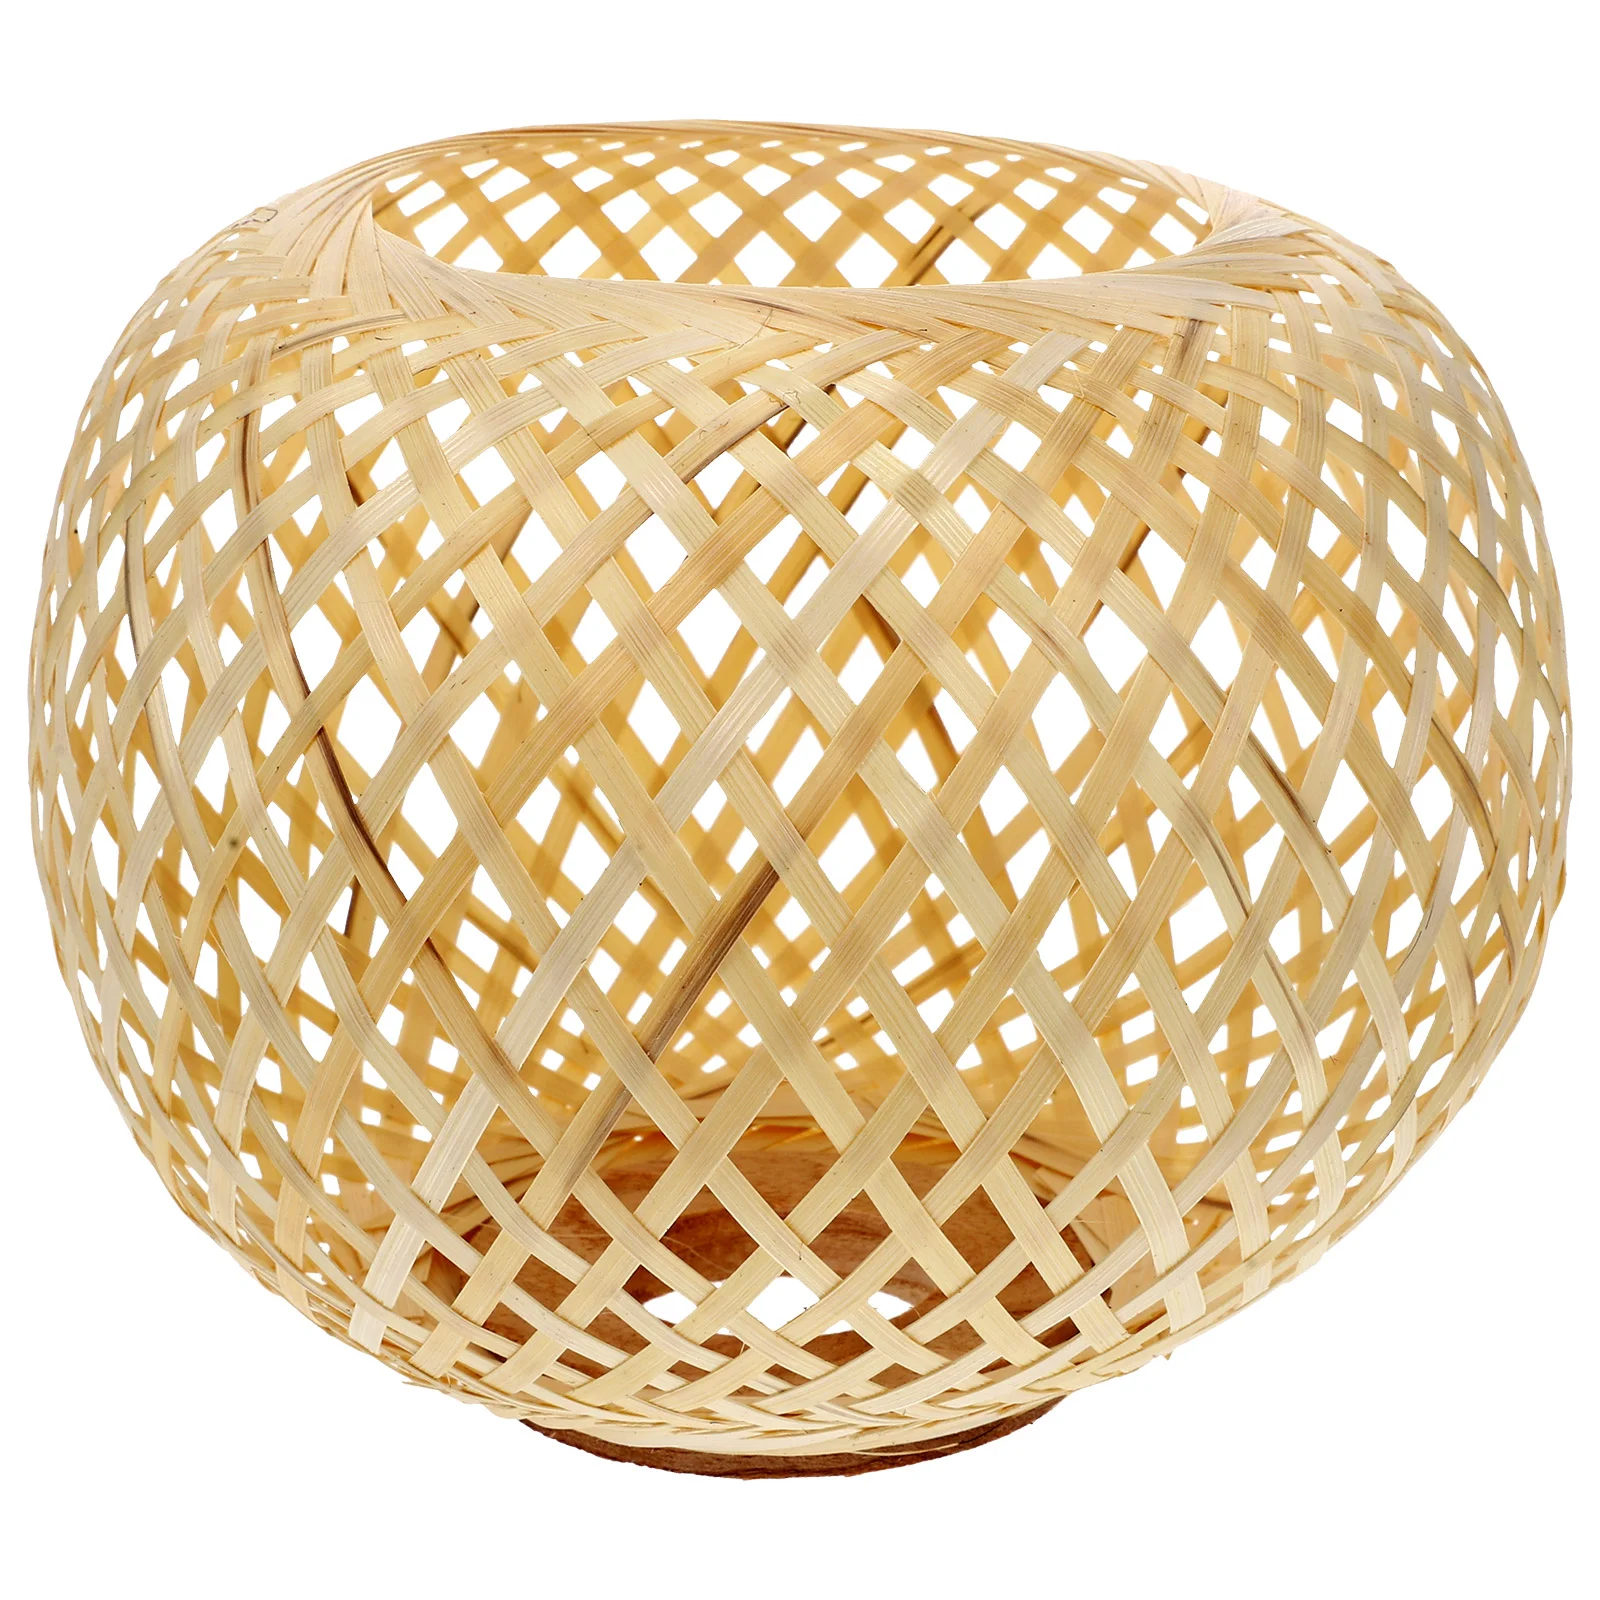 Woven Bamboo Lampshade Light Bulb Cage Guard Rattan Basket Chandelier Lamp Shade Light Cover bamboo laundry basket brown 72 l